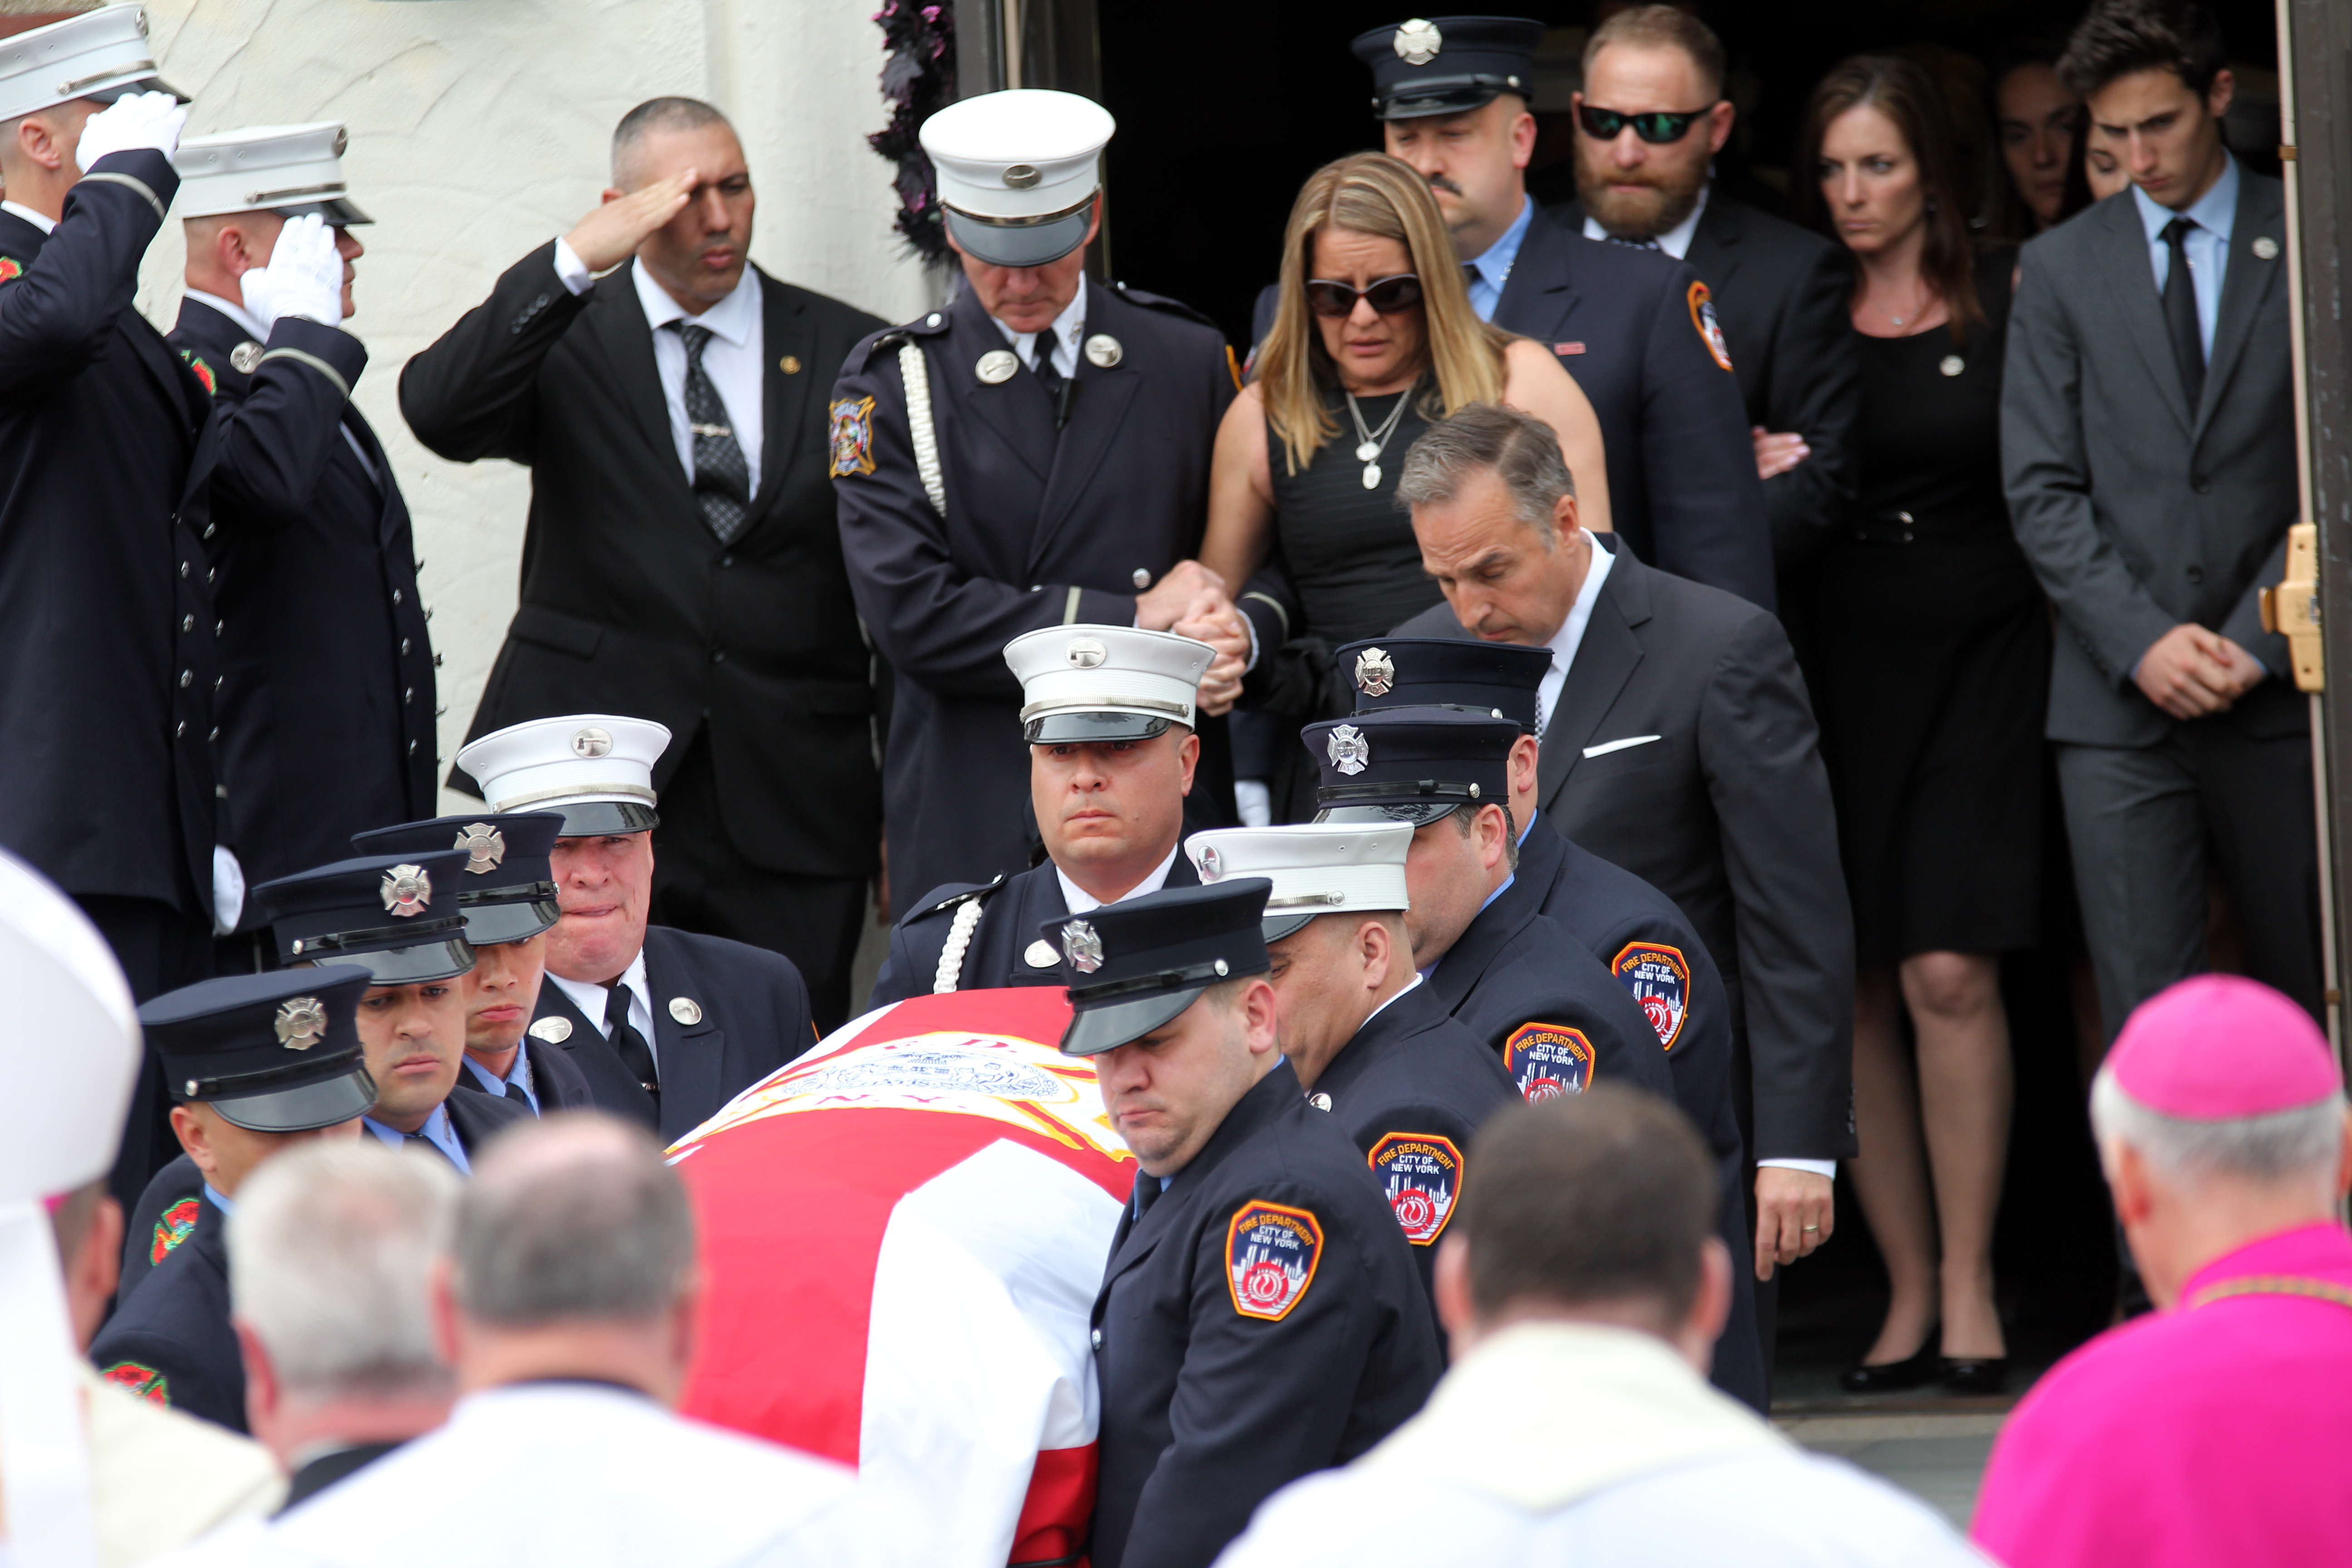 Firefighters carry the body of Firefighter William Tolley out of St. Martin's of Tours Church as his widow, Marie Tolley, follows.